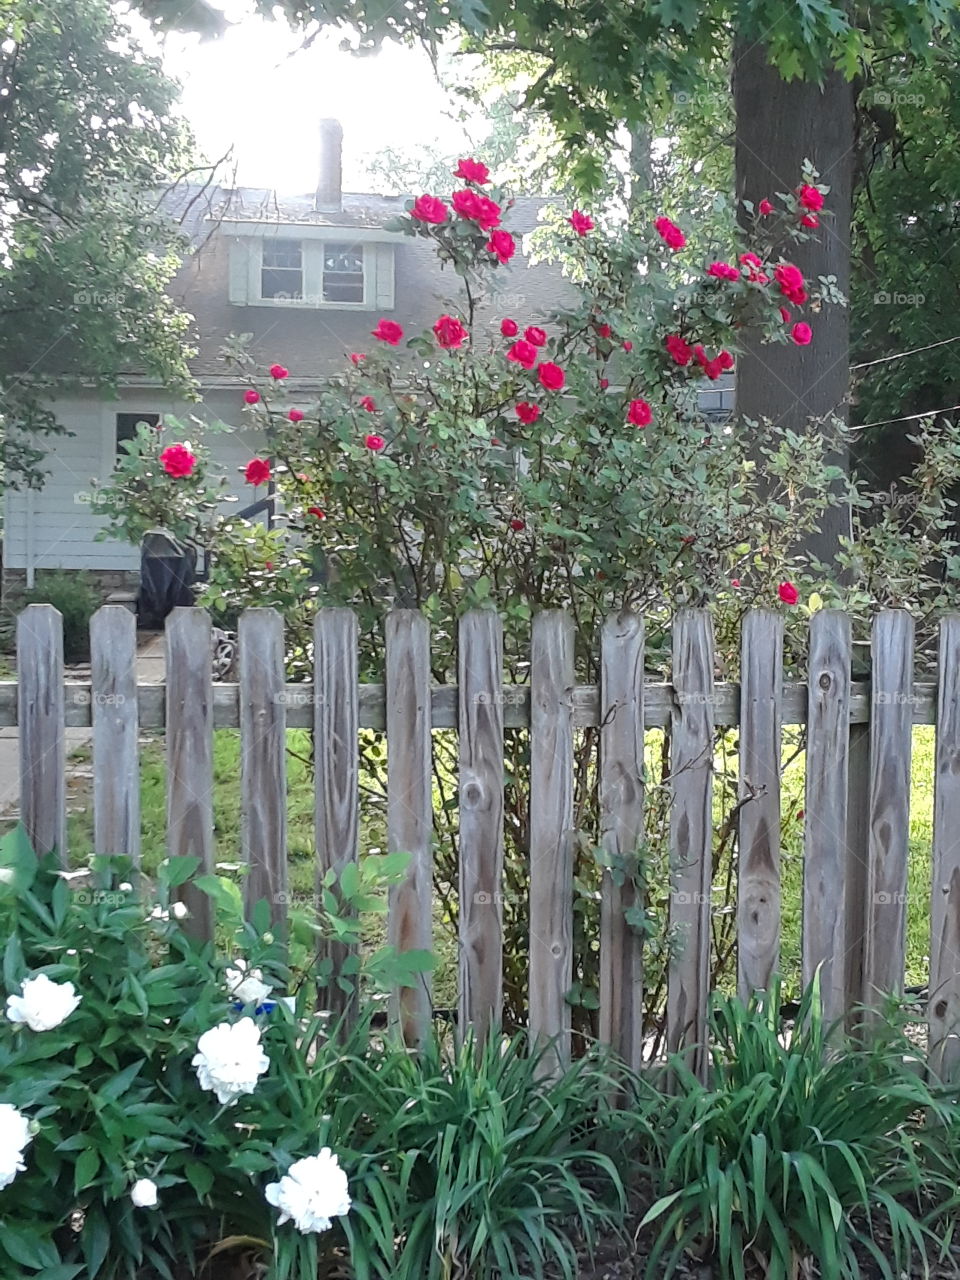 Climbing rose garden on a wooden fence with white peoney